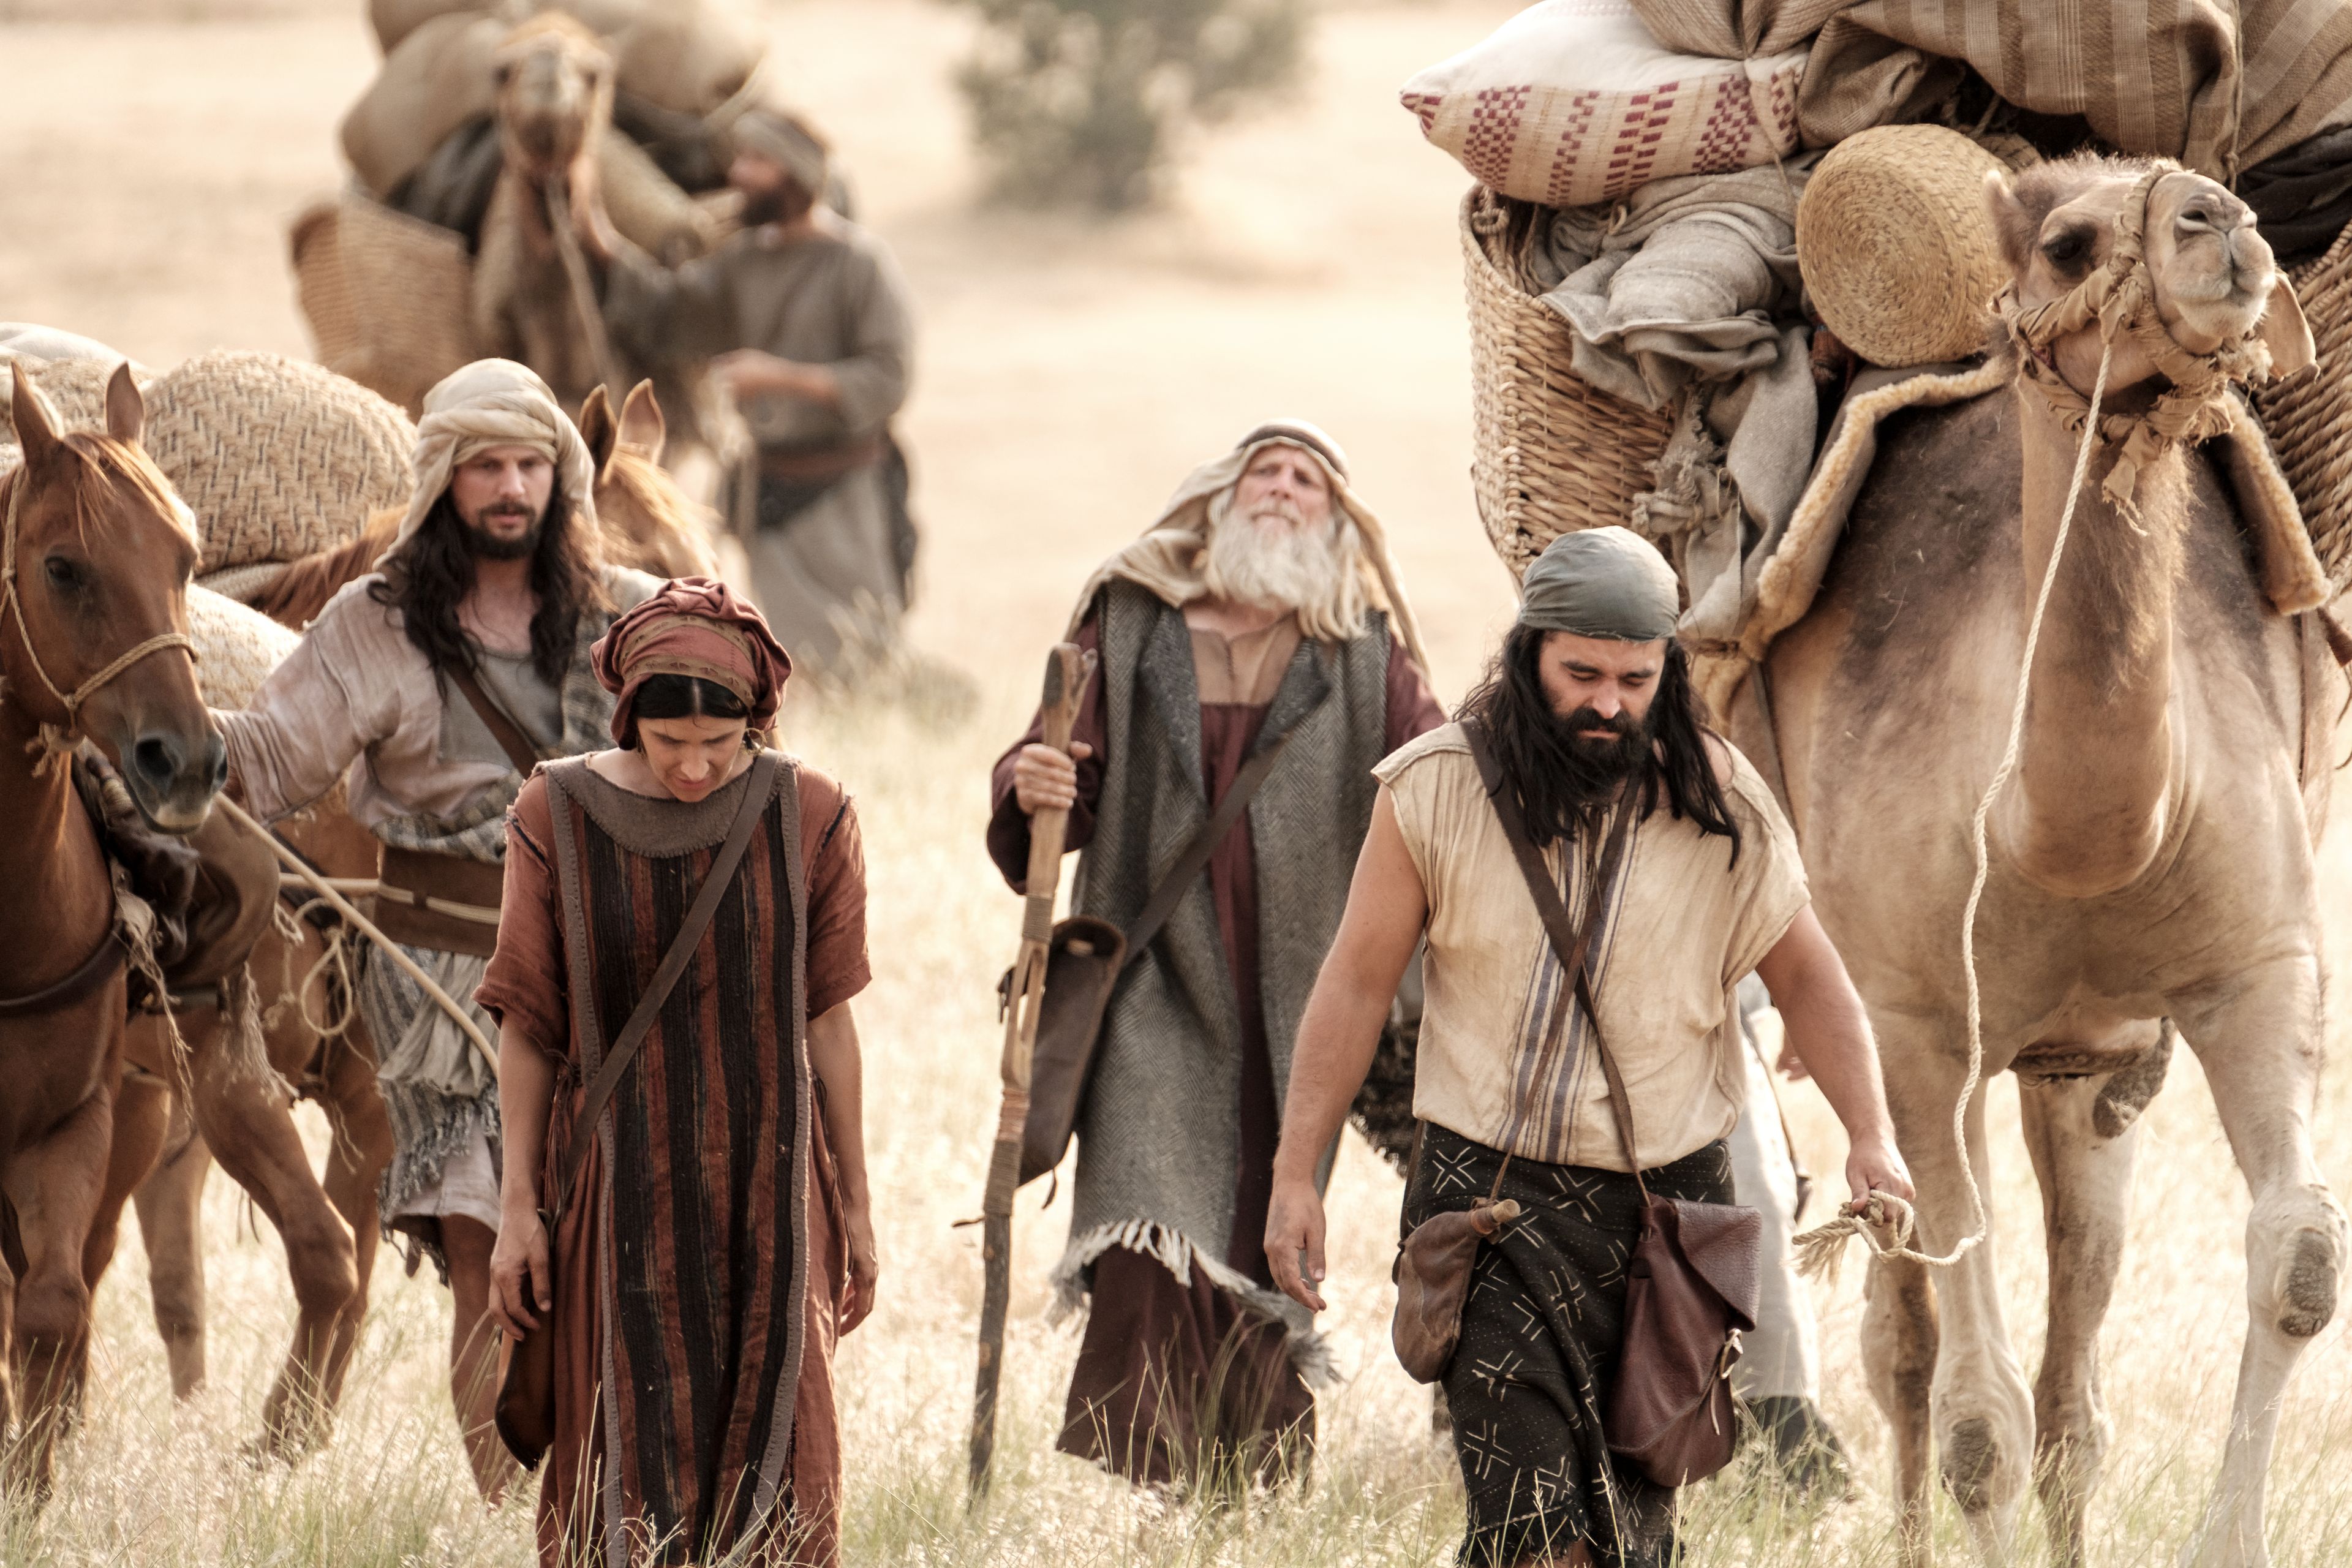 Ishmael's family travels with Nephi and his brothers.